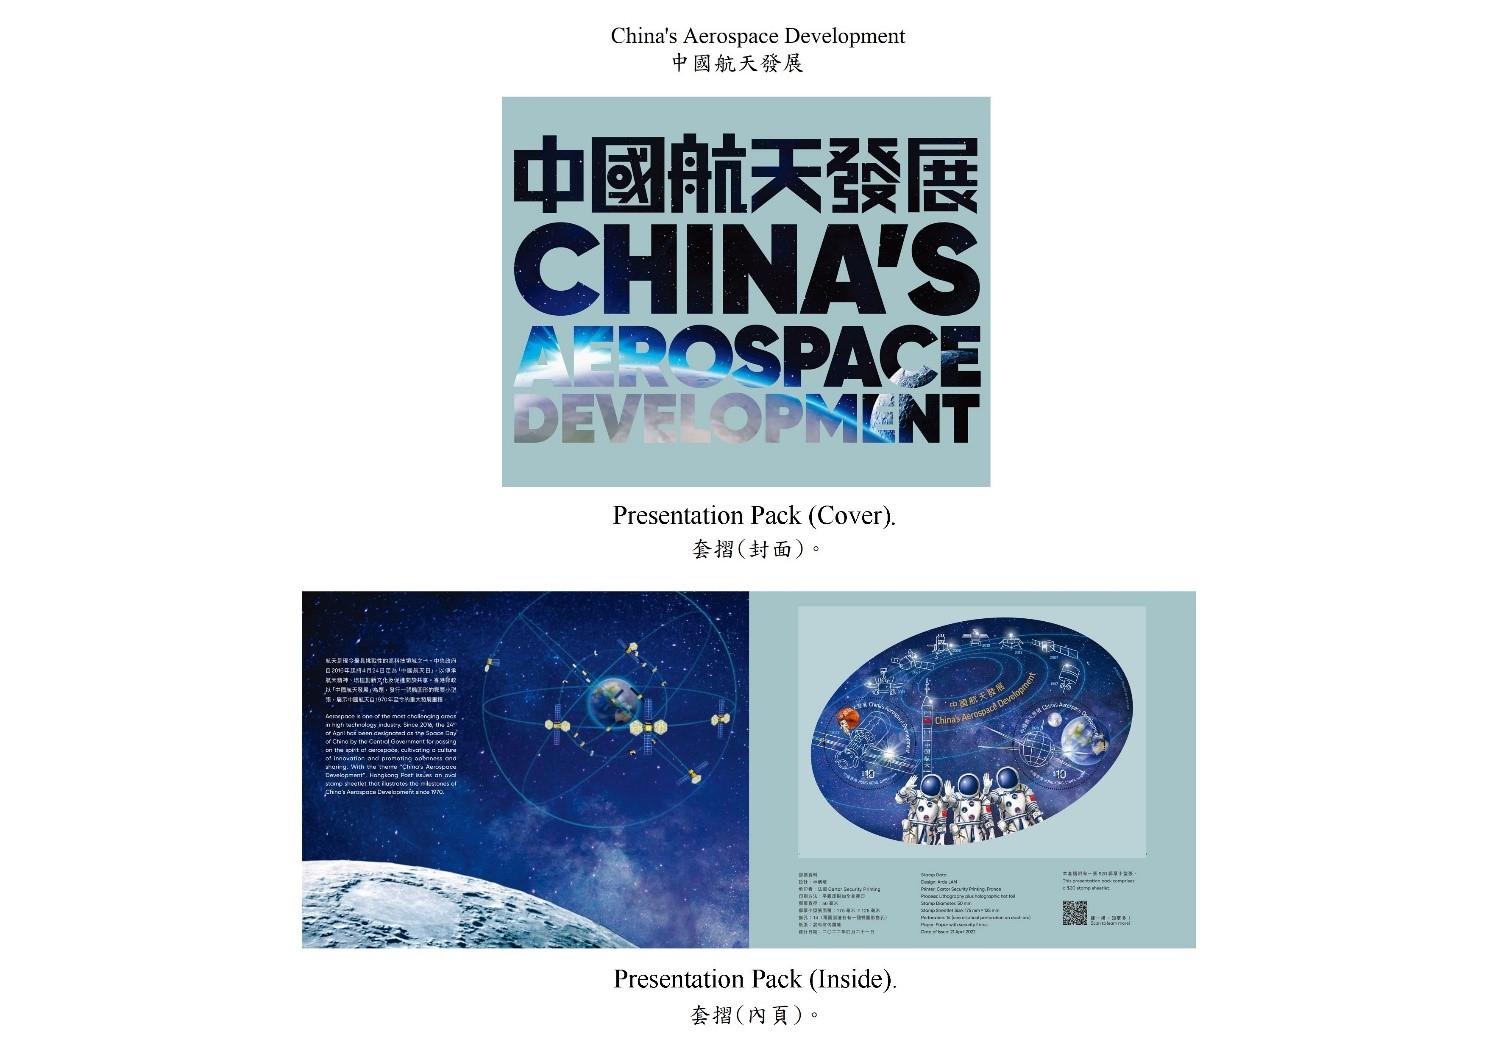 Hongkong Post will launch a special stamp issue and associated philatelic products on the theme of "China's Aerospace Development" on April 21 (Thursday). Photo shows the presentation pack.